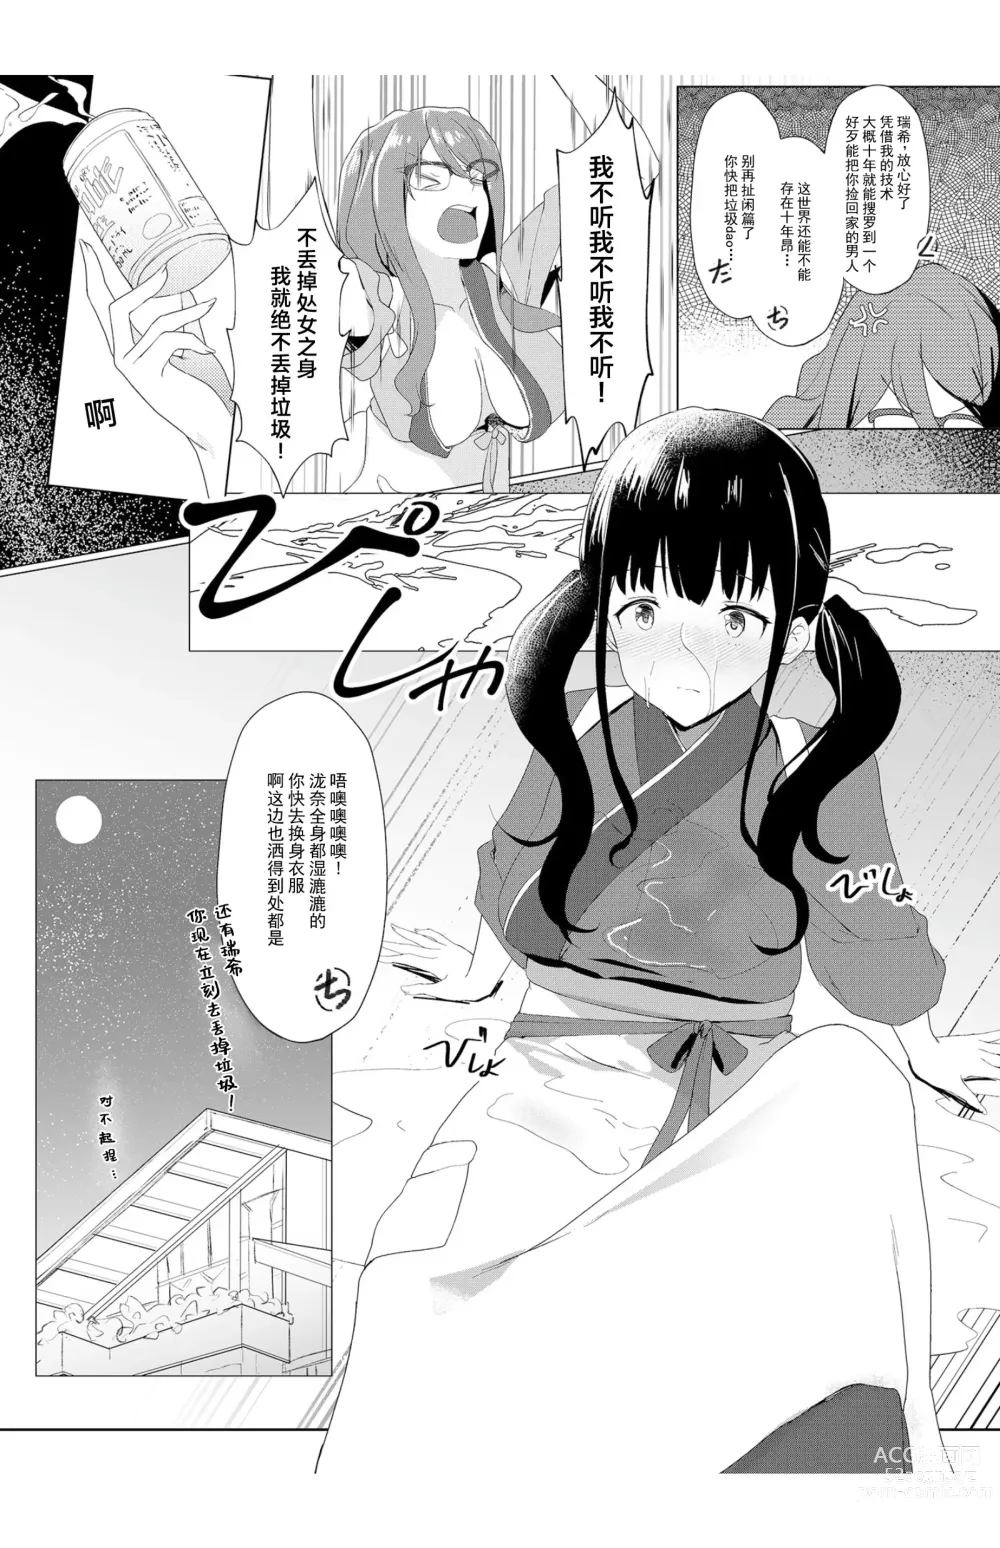 Page 4 of doujinshi 你的心跳 heart beat